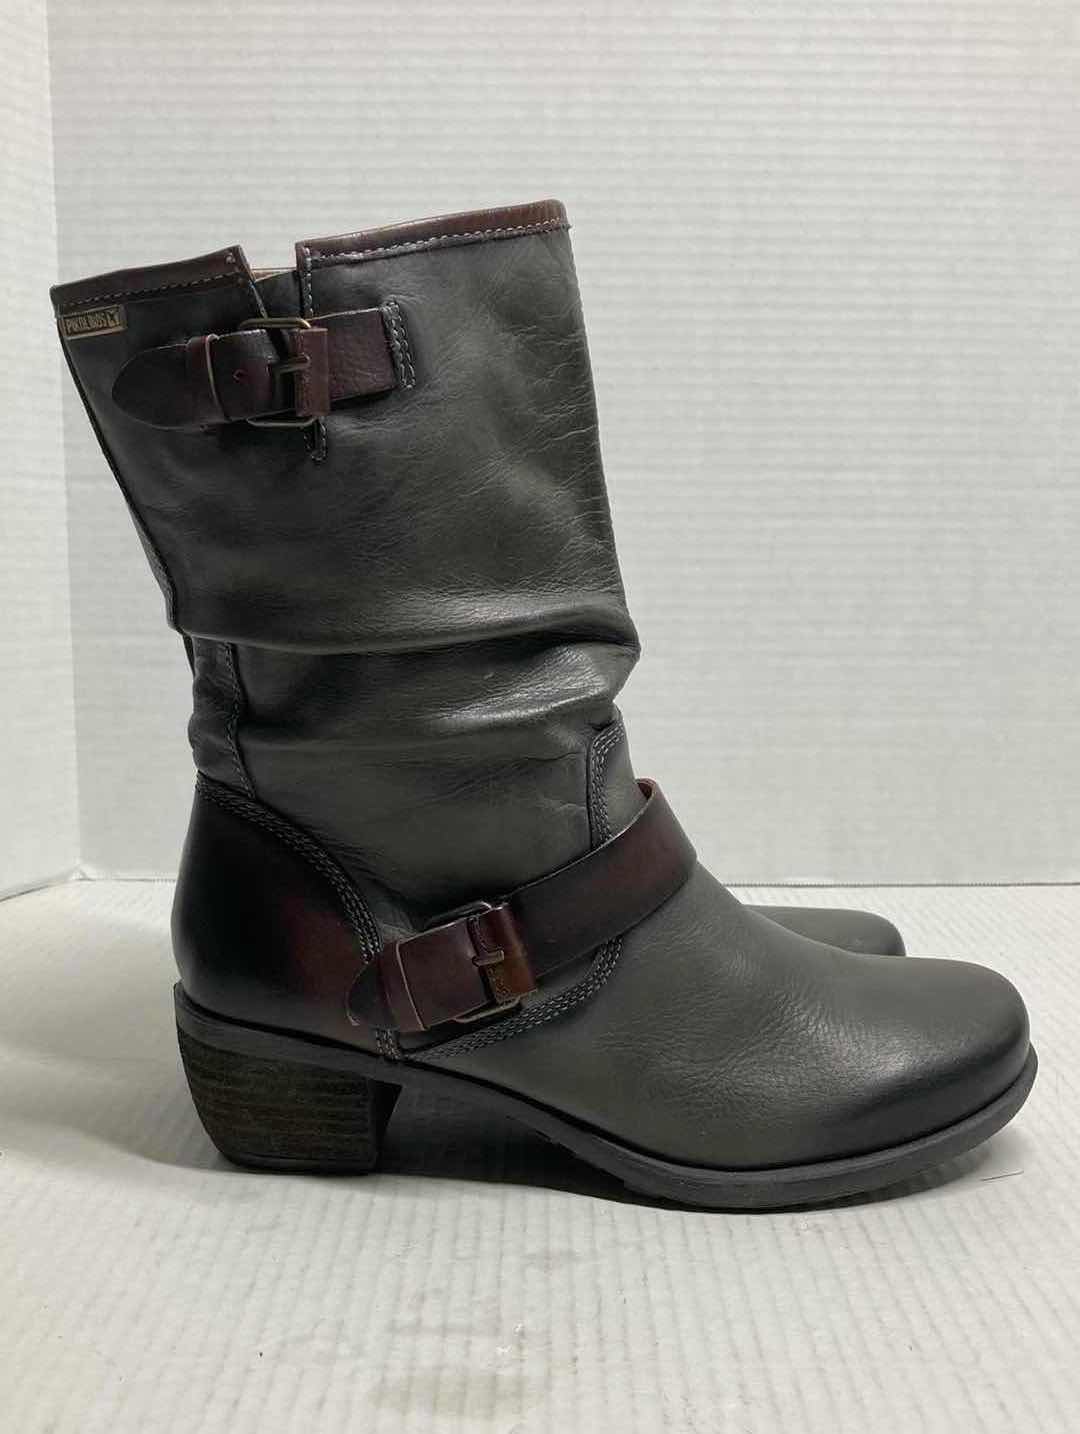 Photo 4 of PIKOLINOS DARK GREY TALL LEATHER COMBAT BOOTS W BROWN BUCKLE WOMAN’S SIZE EU 39